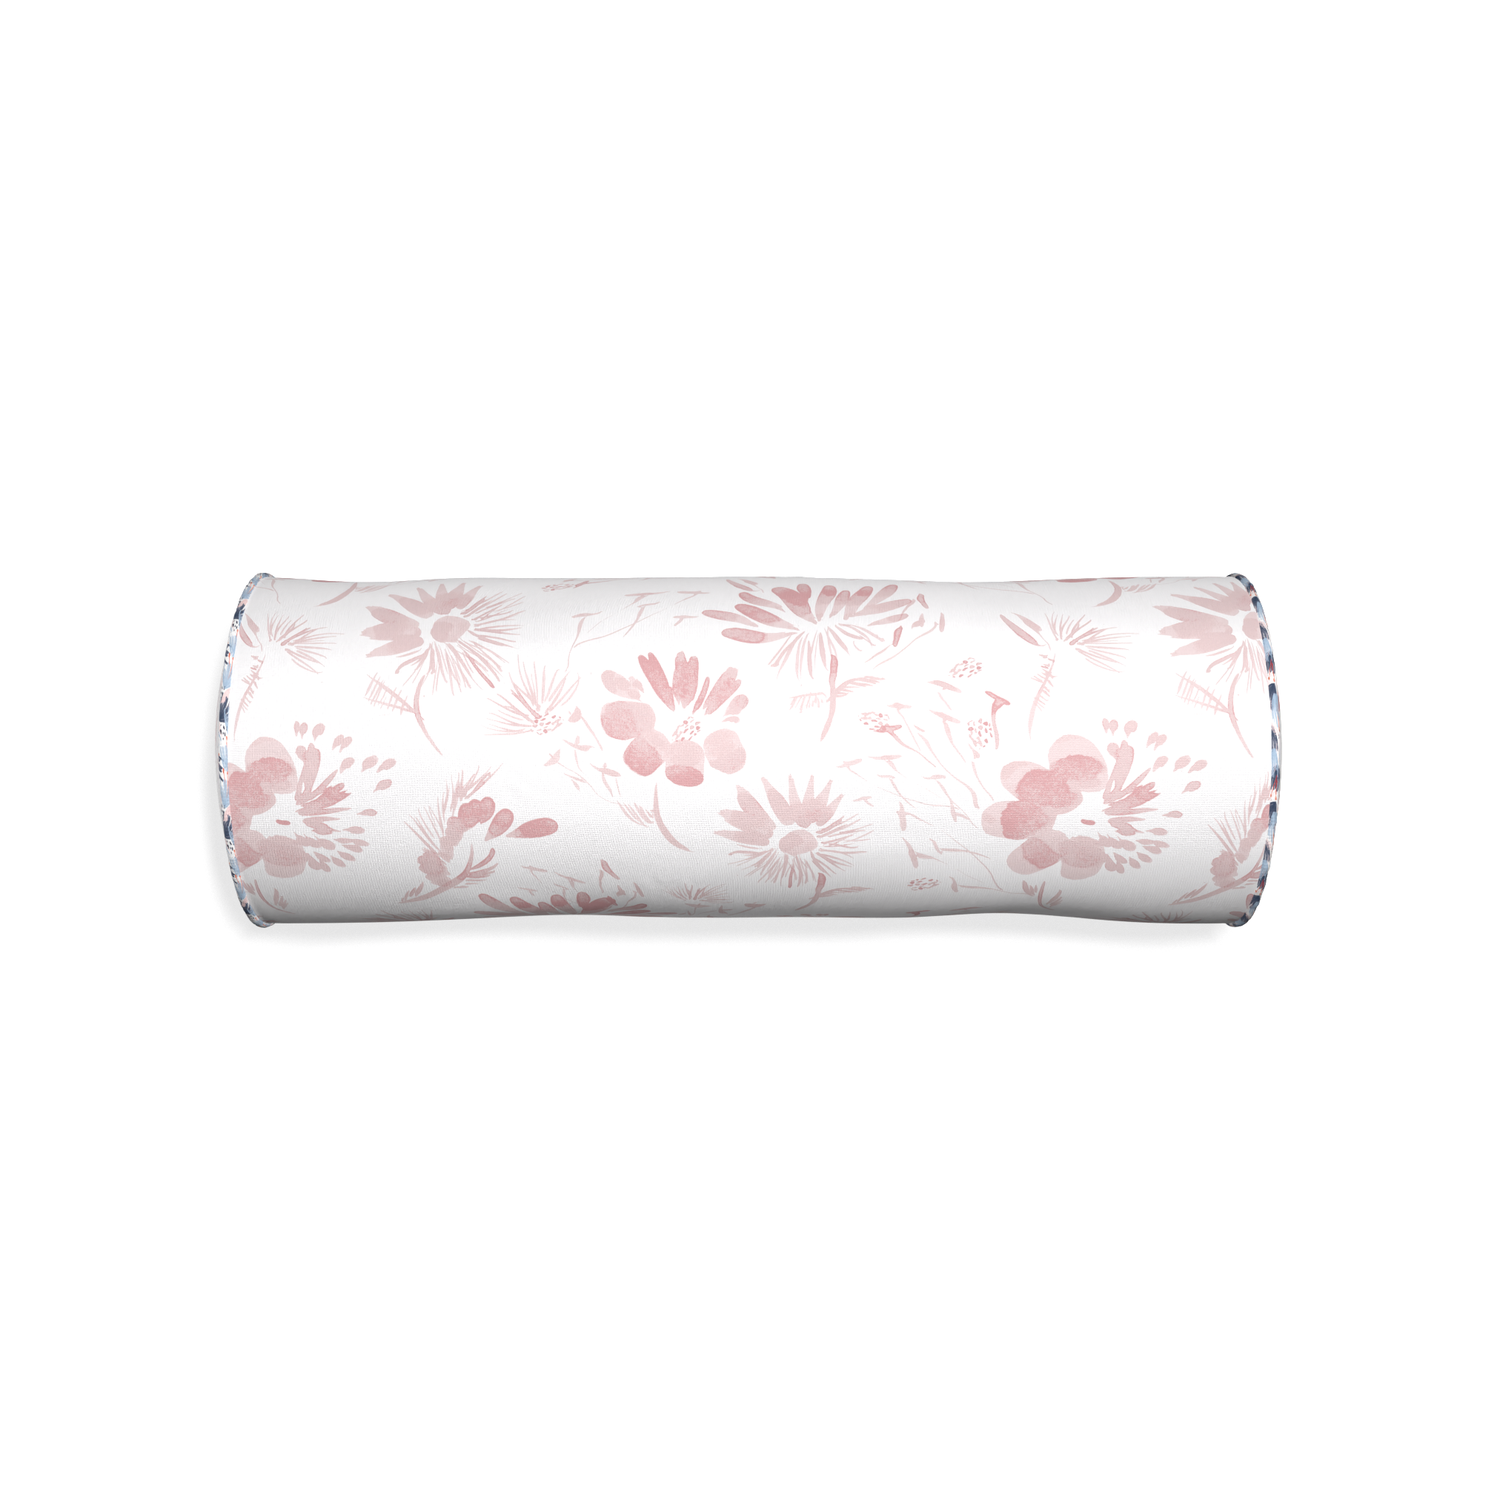 Bolster blake custom pink floralpillow with e piping on white background